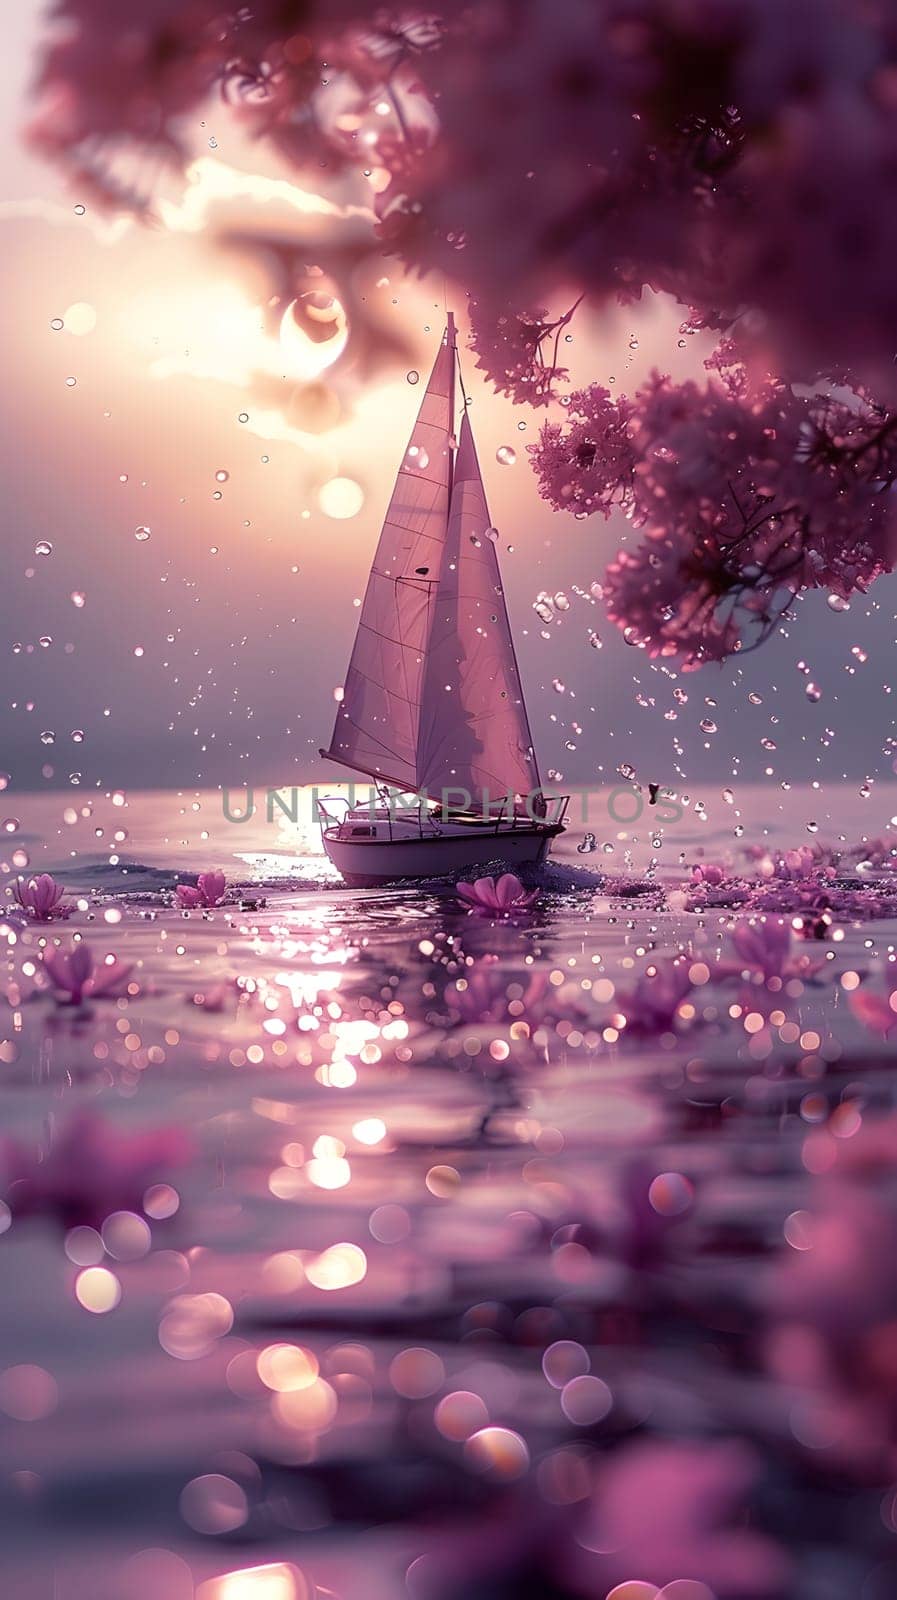 Sailboat glides on water amid cherry blossom trees under violet sky by Nadtochiy